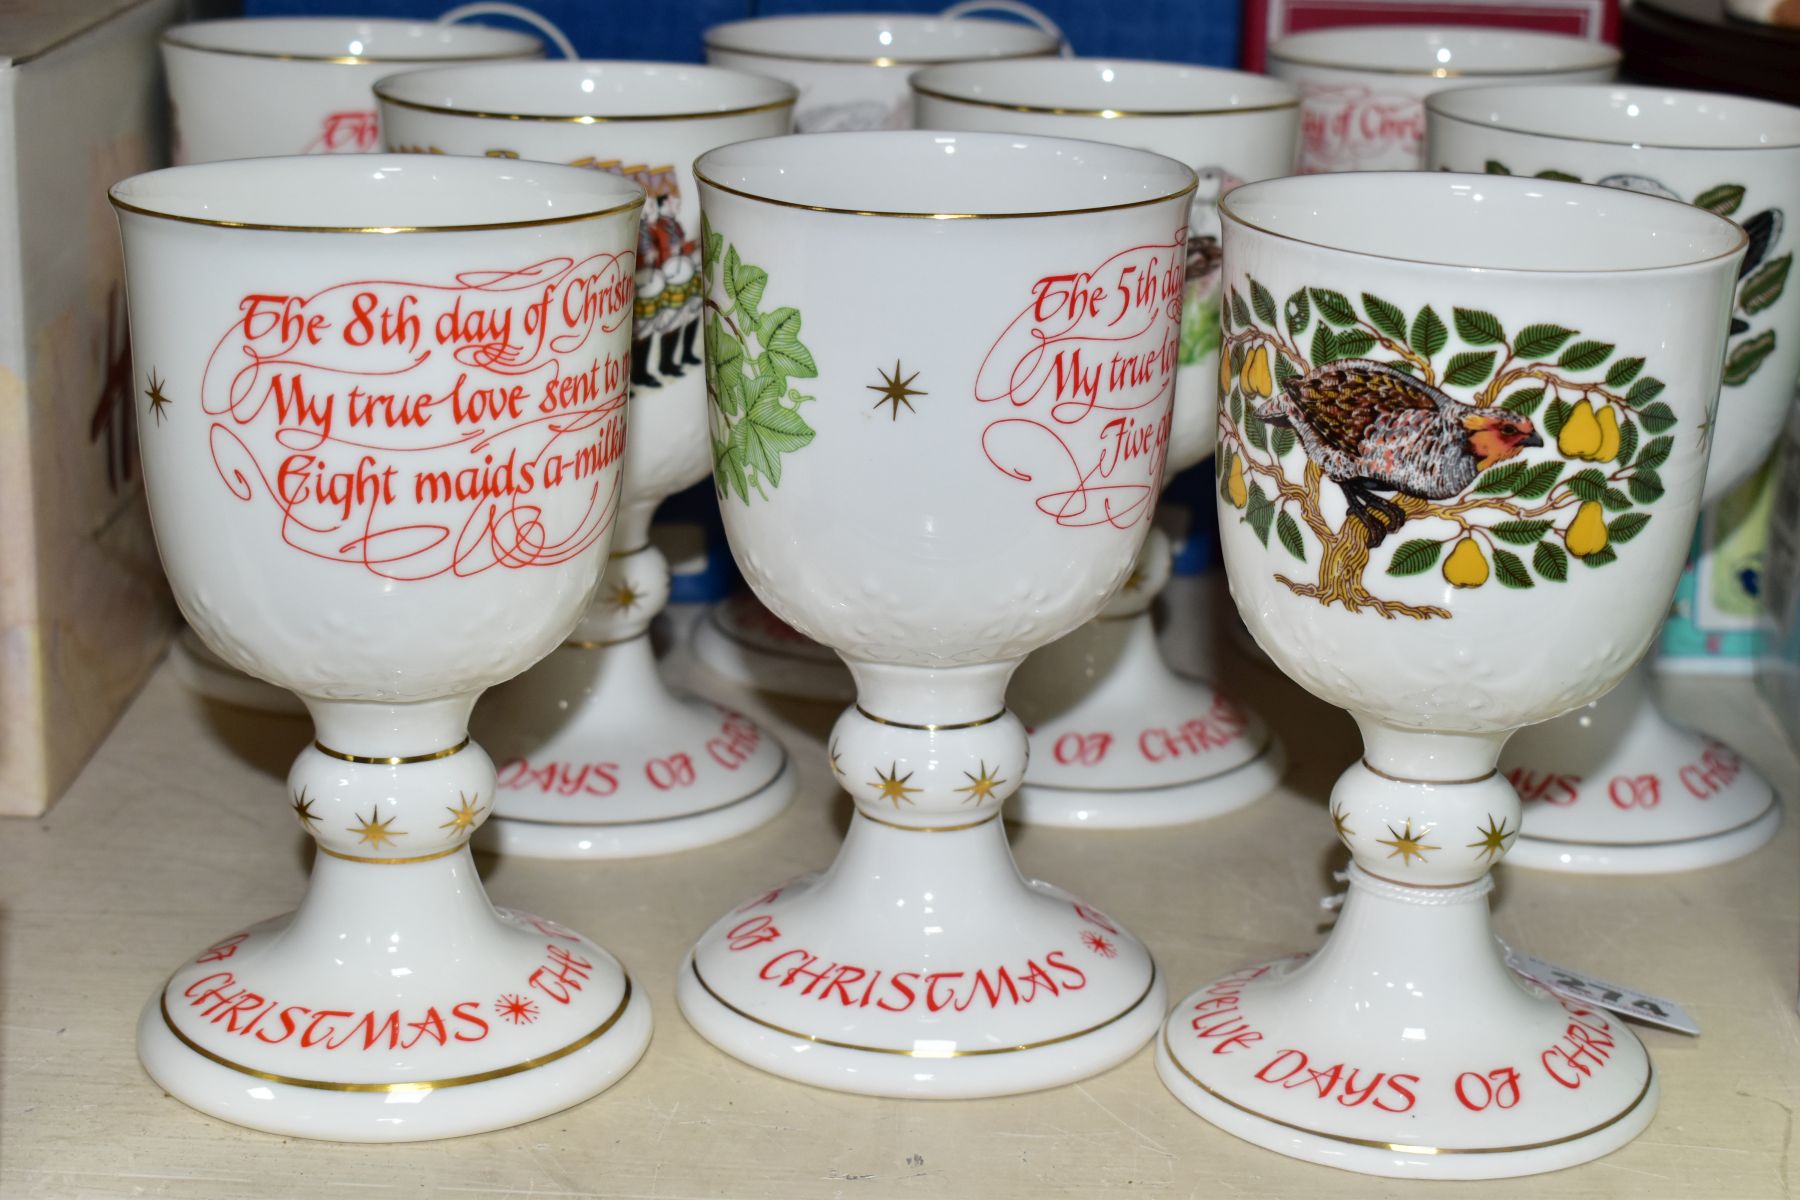 A SET OF TWELVE LIMITED EDITION ROYAL DOULTON GOBLETS, The Twelve Days of Christmas, limited to 10, - Image 5 of 6